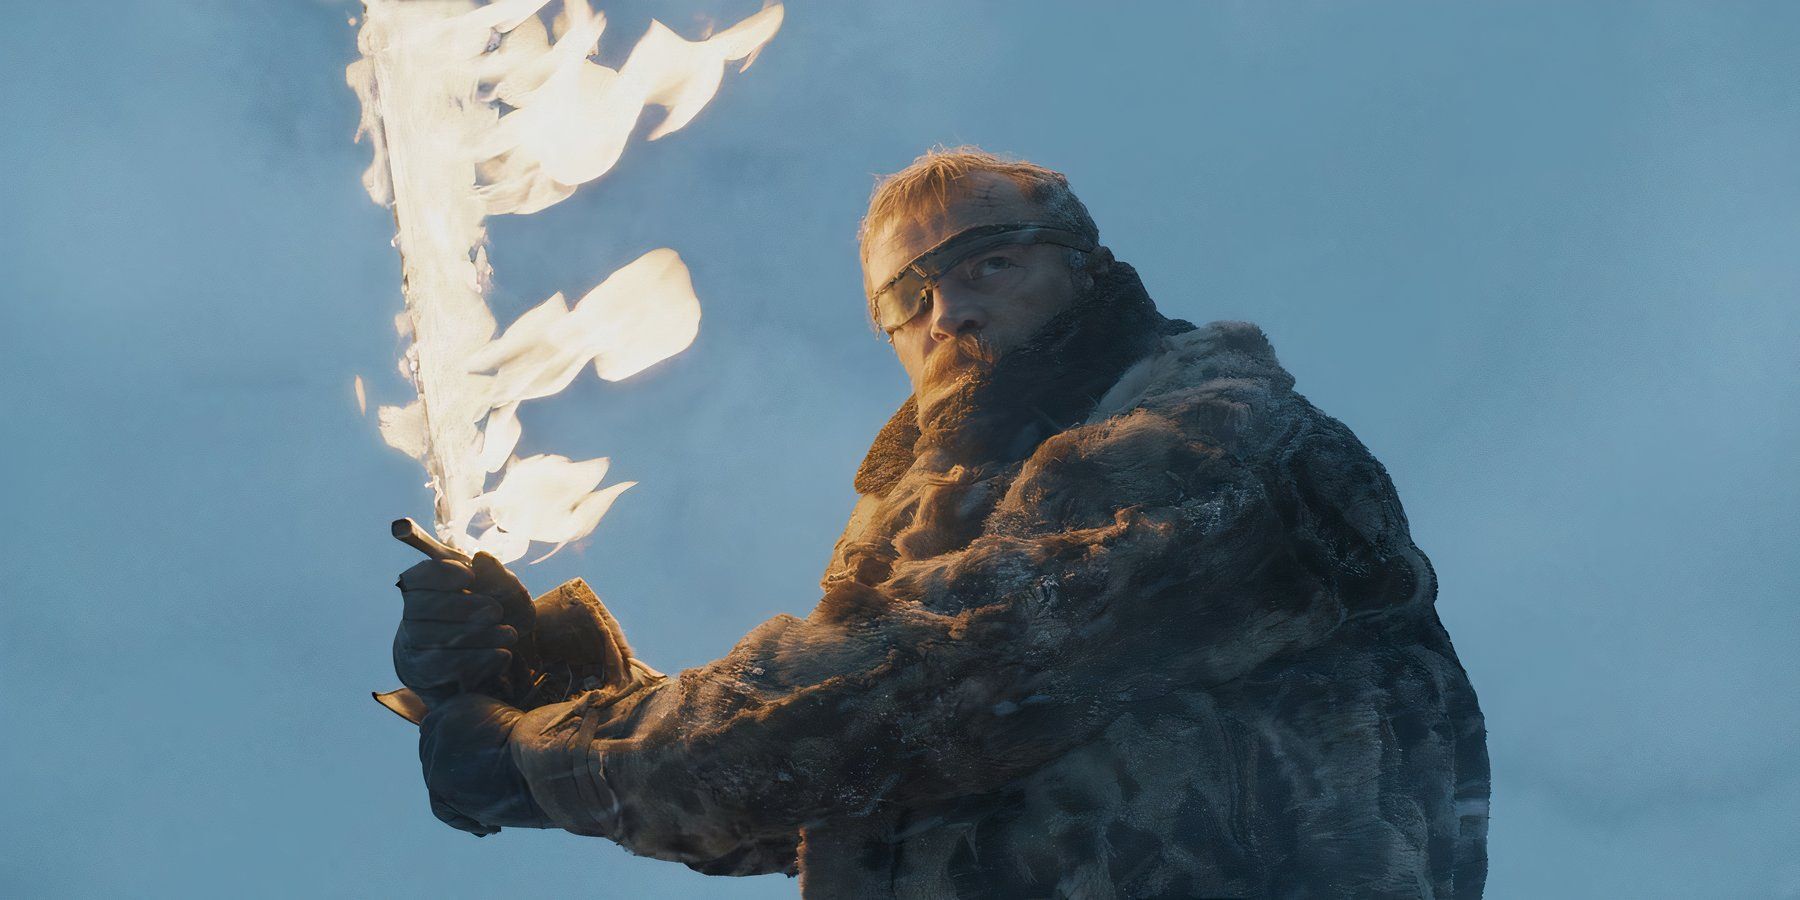 Beric Dondarrion with his flaming sword facing off against the White Walkers in Game of Thrones